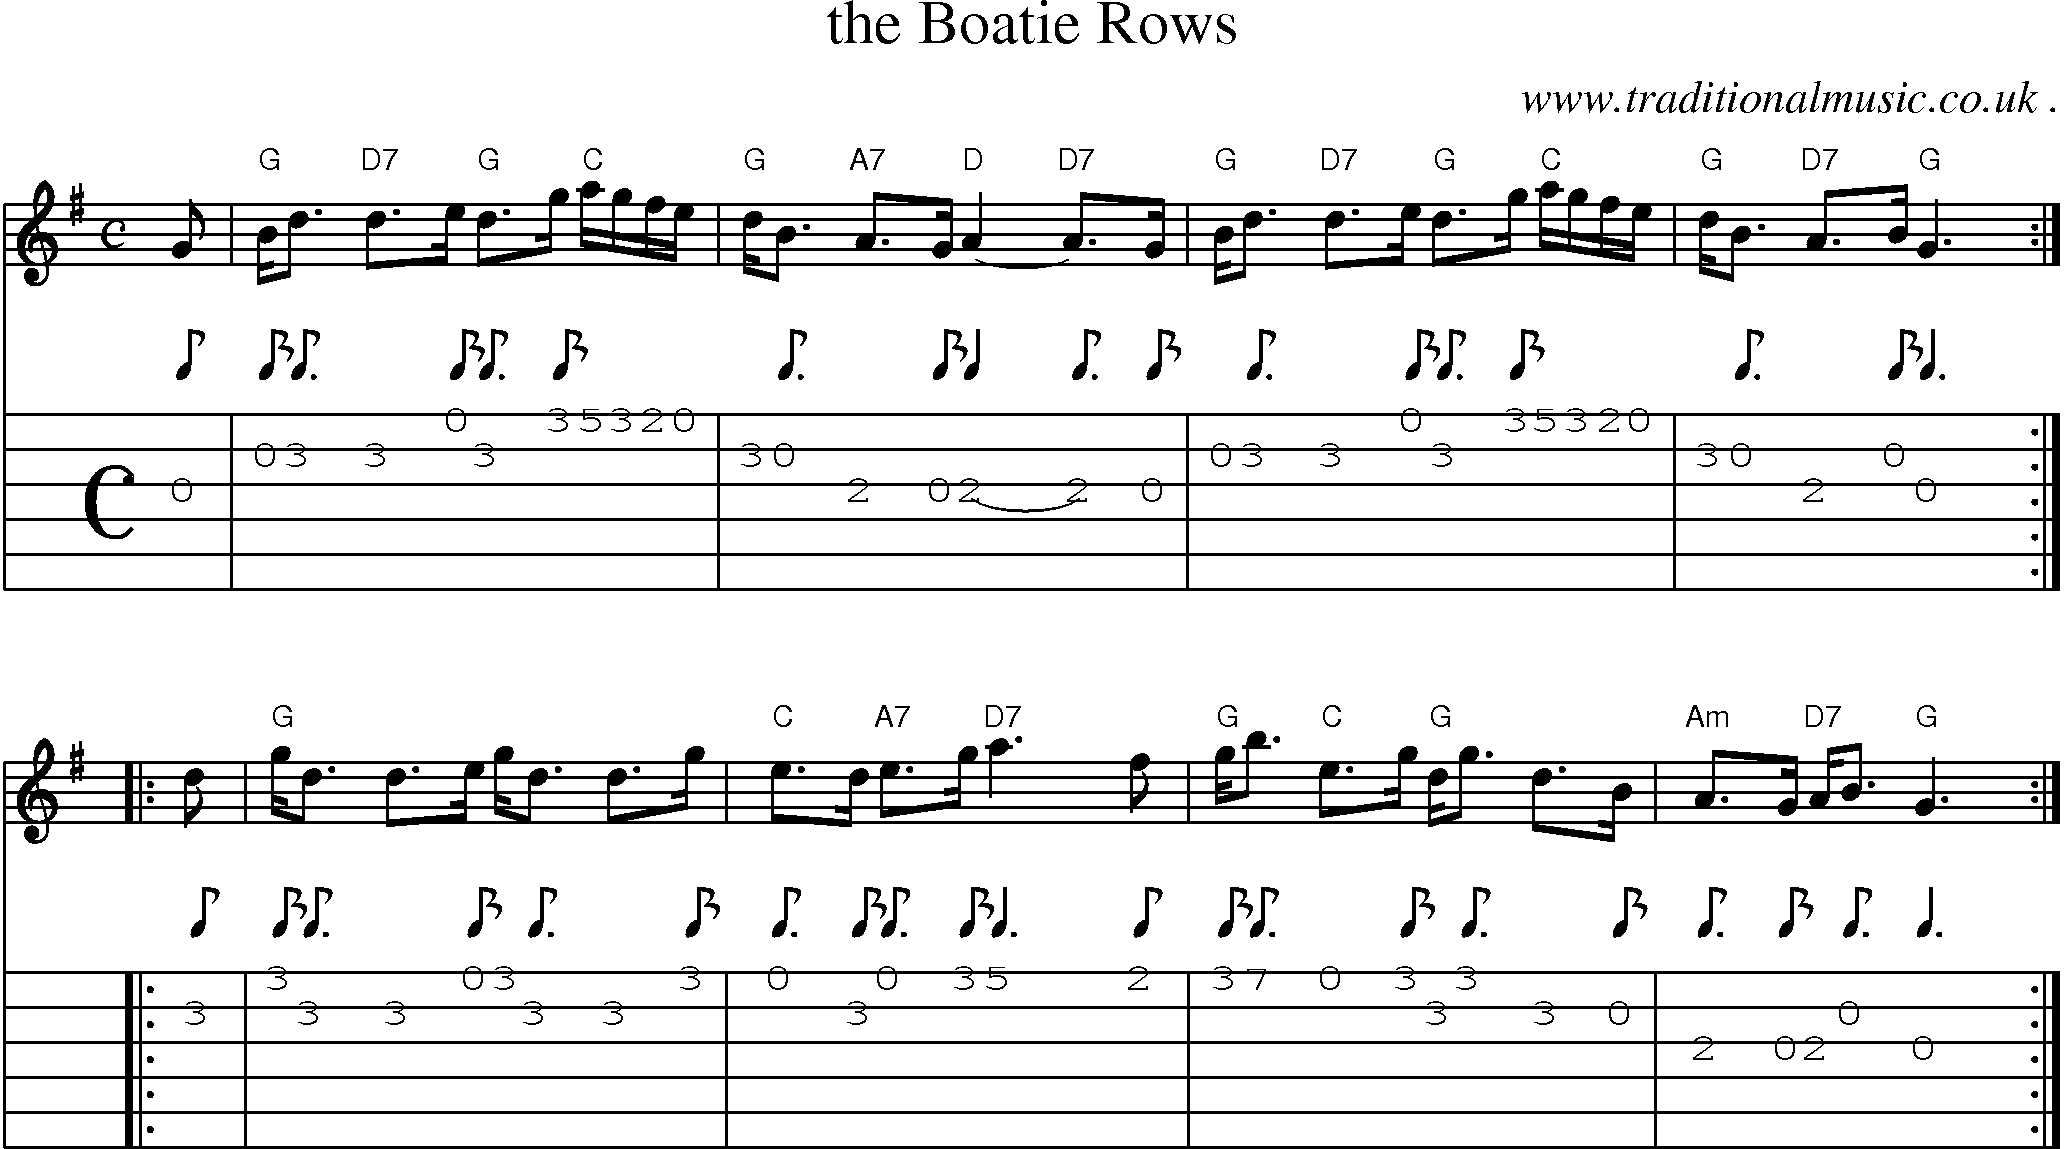 Sheet-music  score, Chords and Guitar Tabs for The Boatie Rows